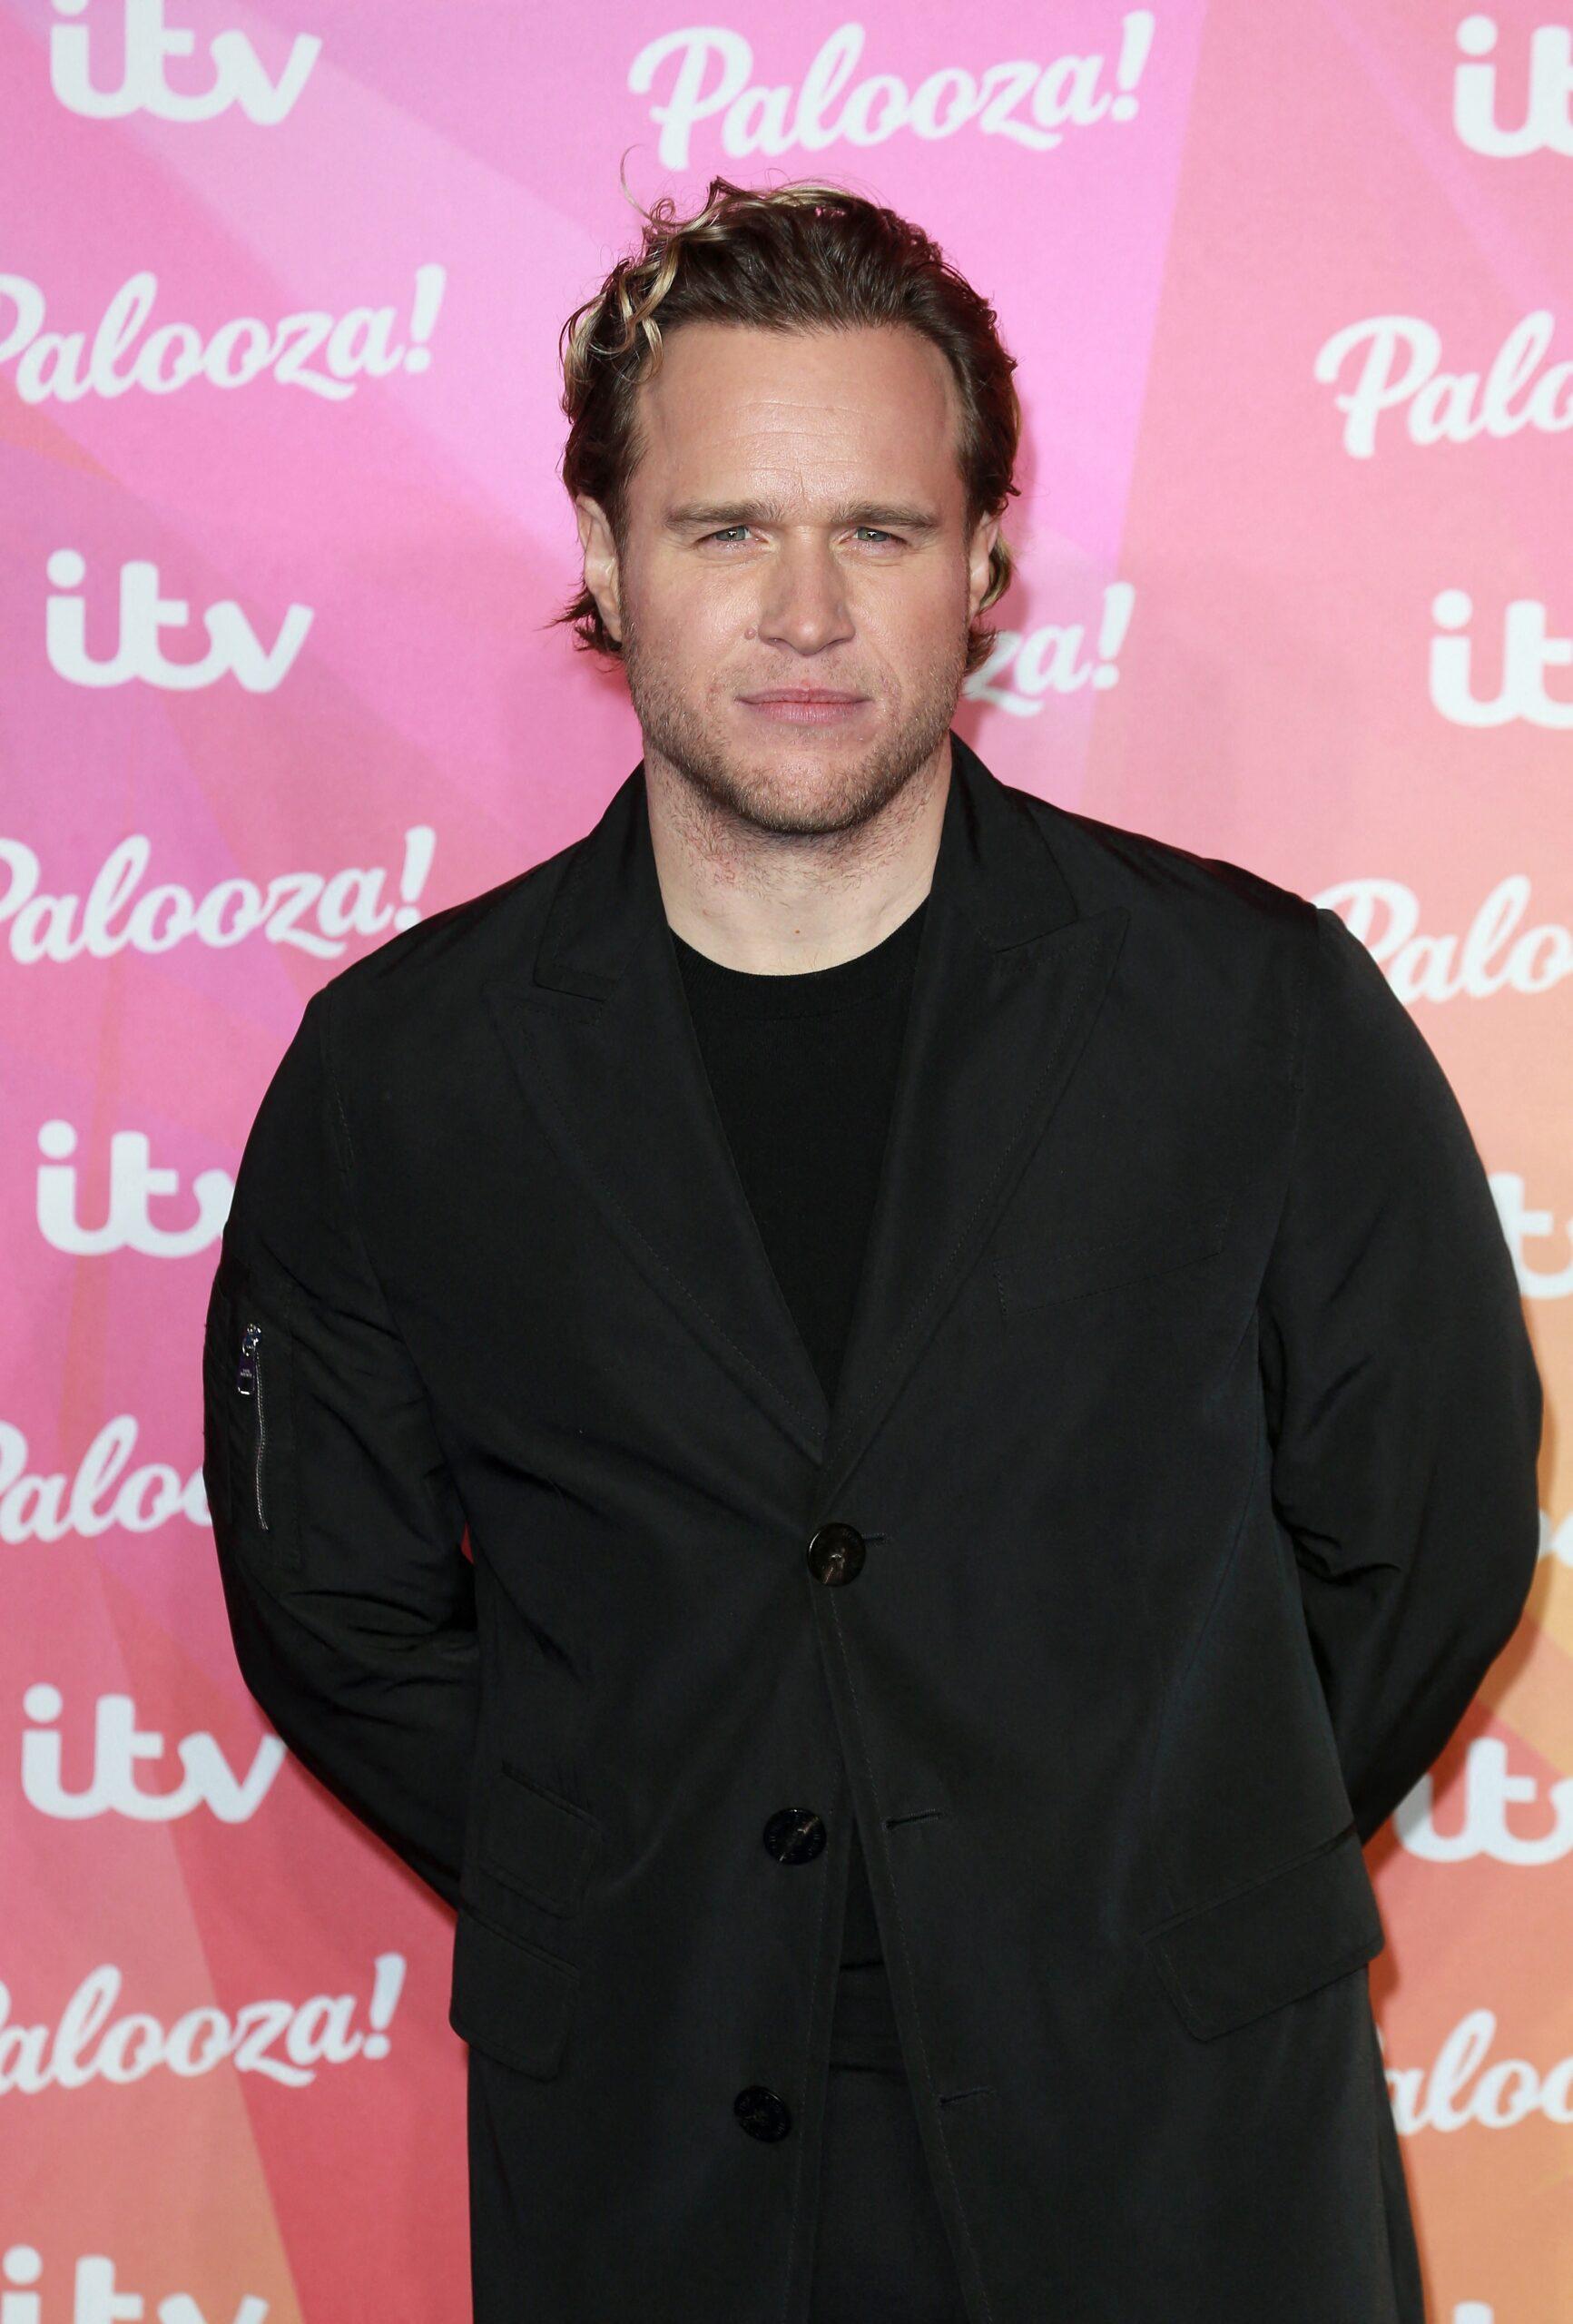 Olly Murs at the ITV Palooza! 2021 in London, England.